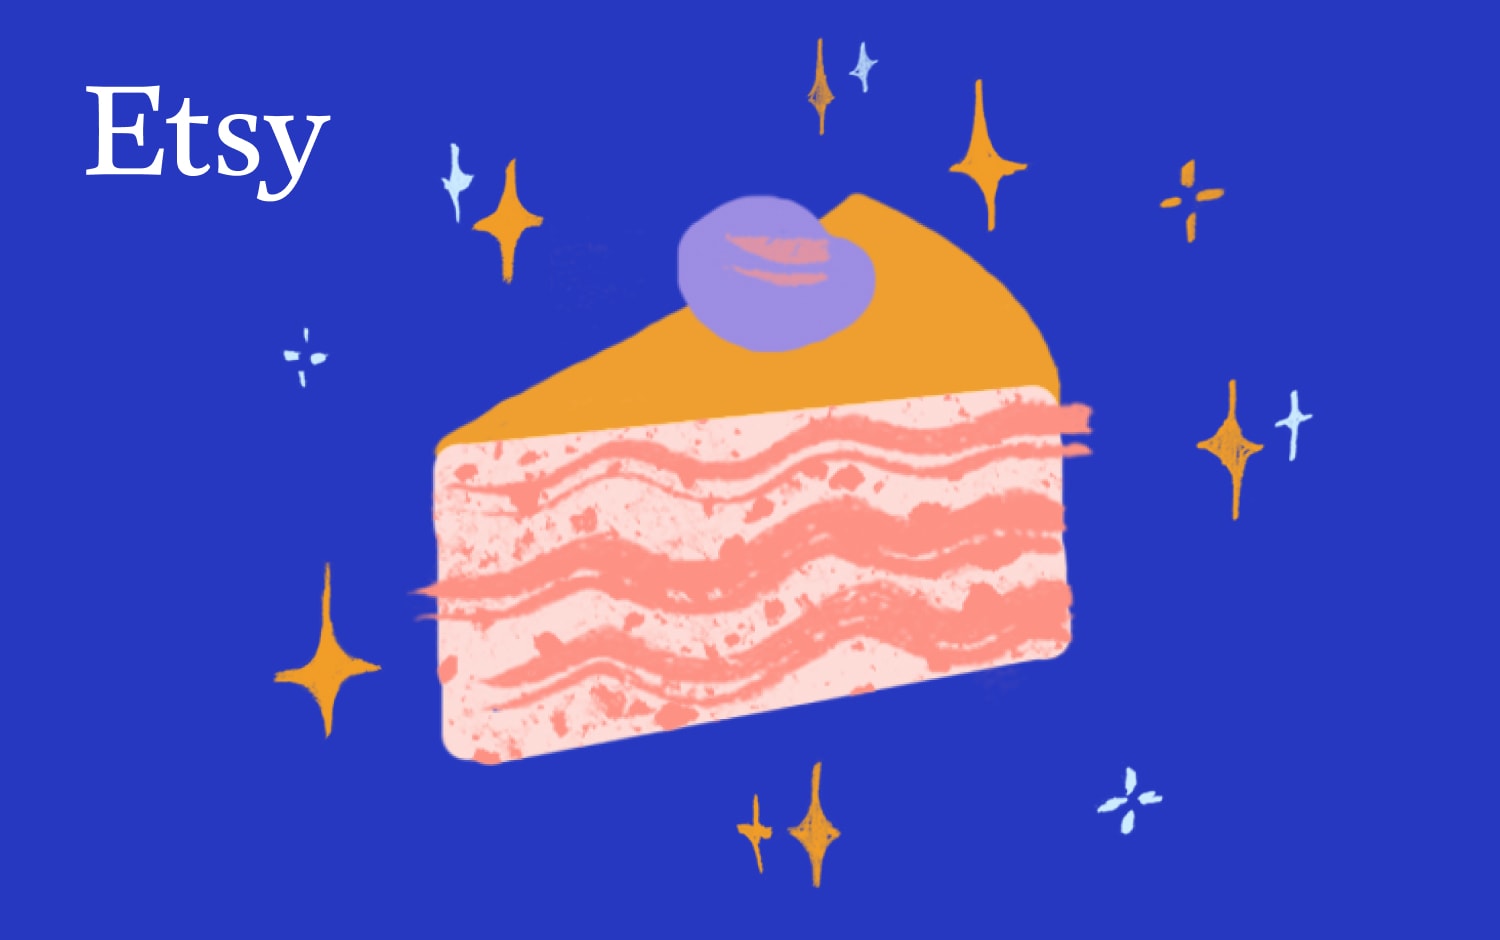 Illustration of a slice of layered cake with pink frosting, topped with a purple decoration resembling a berry. The cake is set against a deep blue background, sprinkled with various white and yellow sparkles. In the upper left corner, there's a white Etsy logo